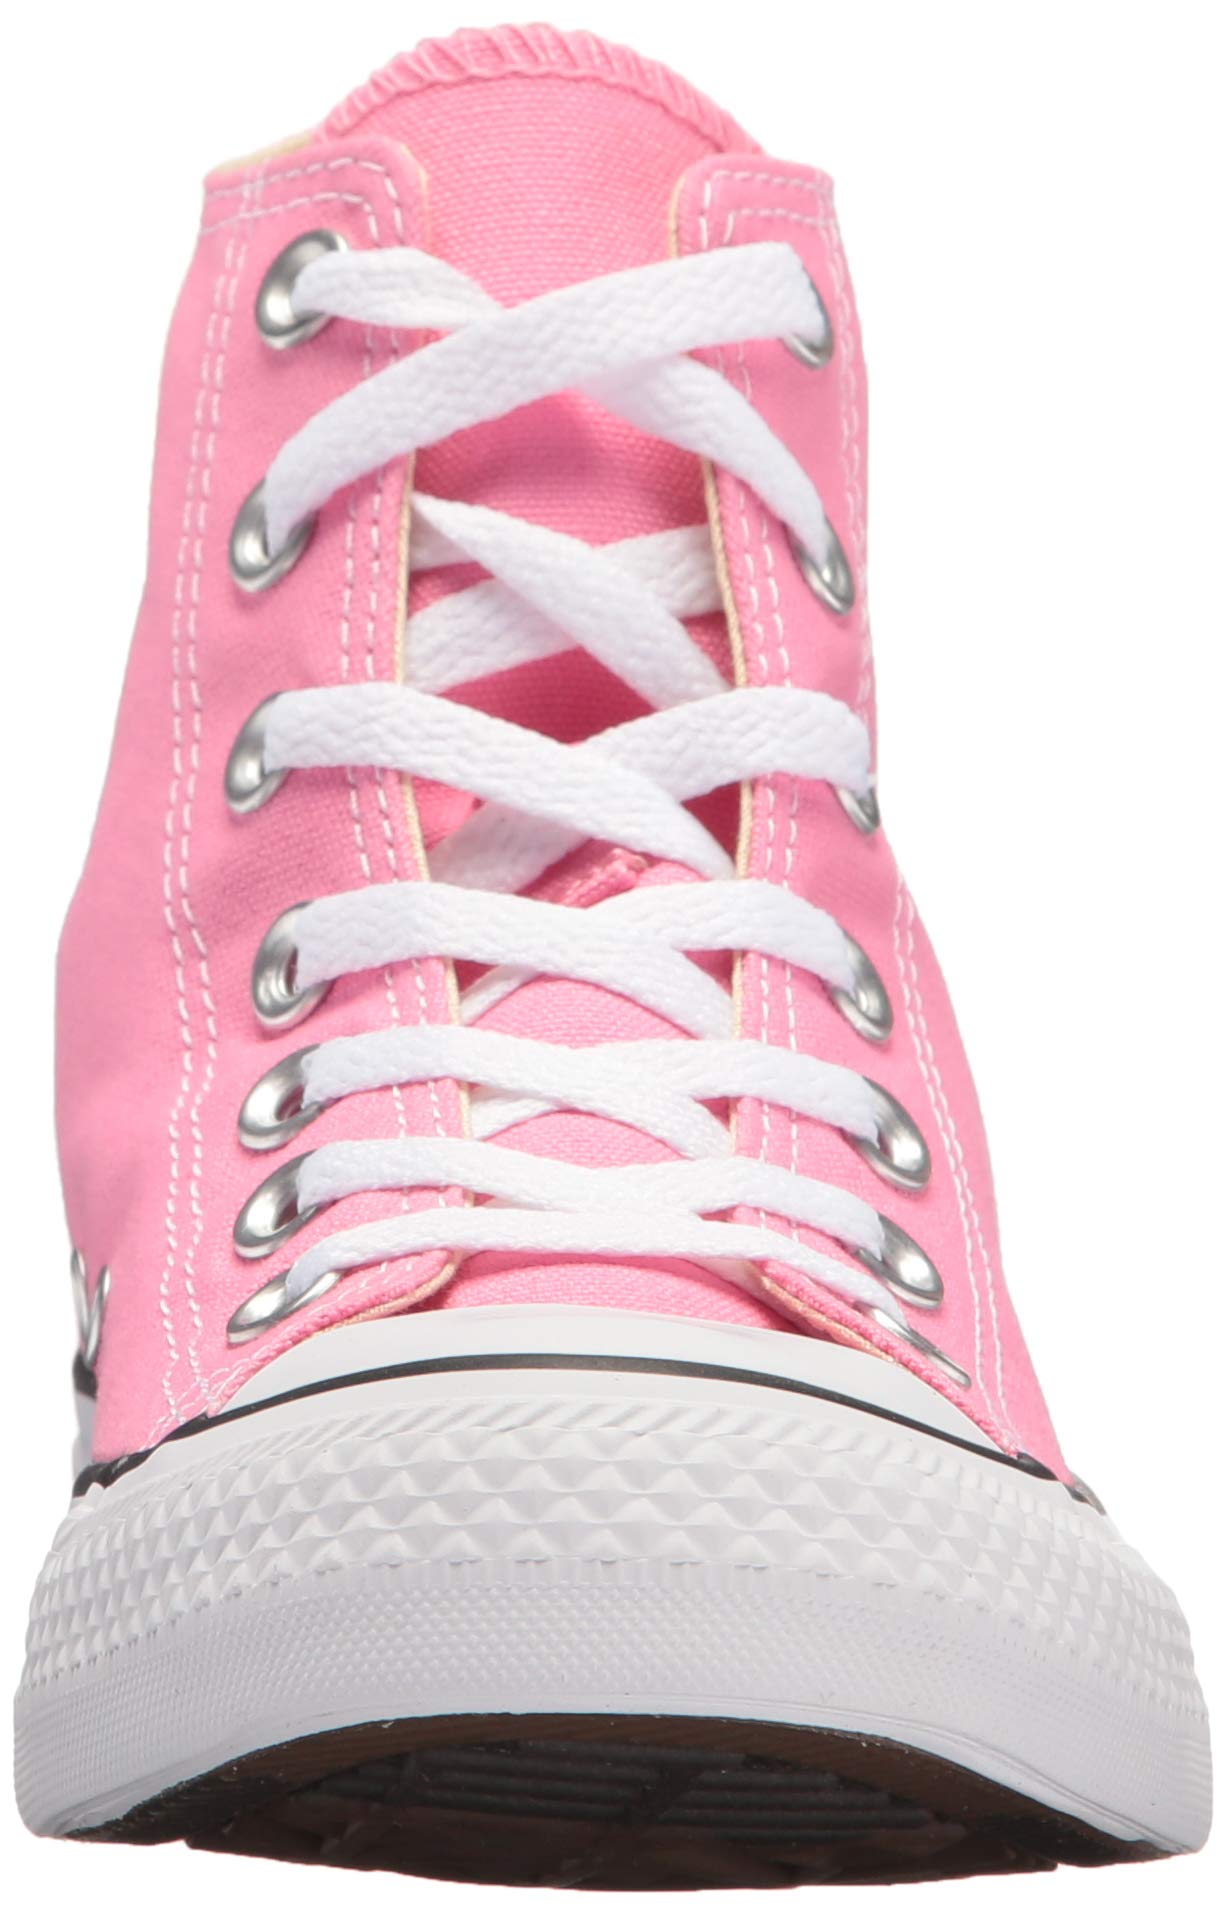 Converse Chuck Taylor All Star Hi Pink High-Top Fashion Sneaker - 6.5M / 4.5M - image 4 of 10